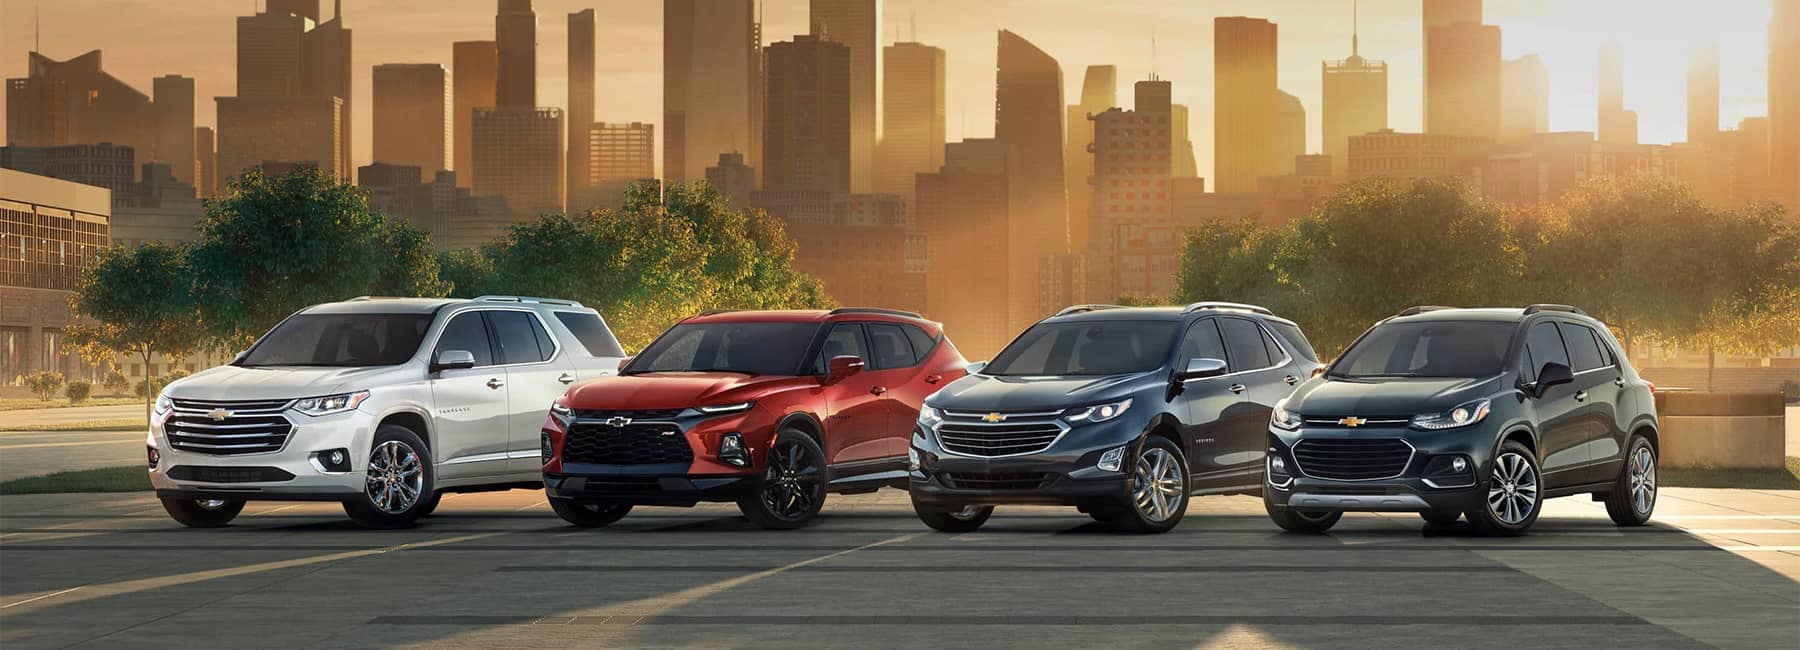 2020 Chevrolet SUVs Lineup with City Backdrop